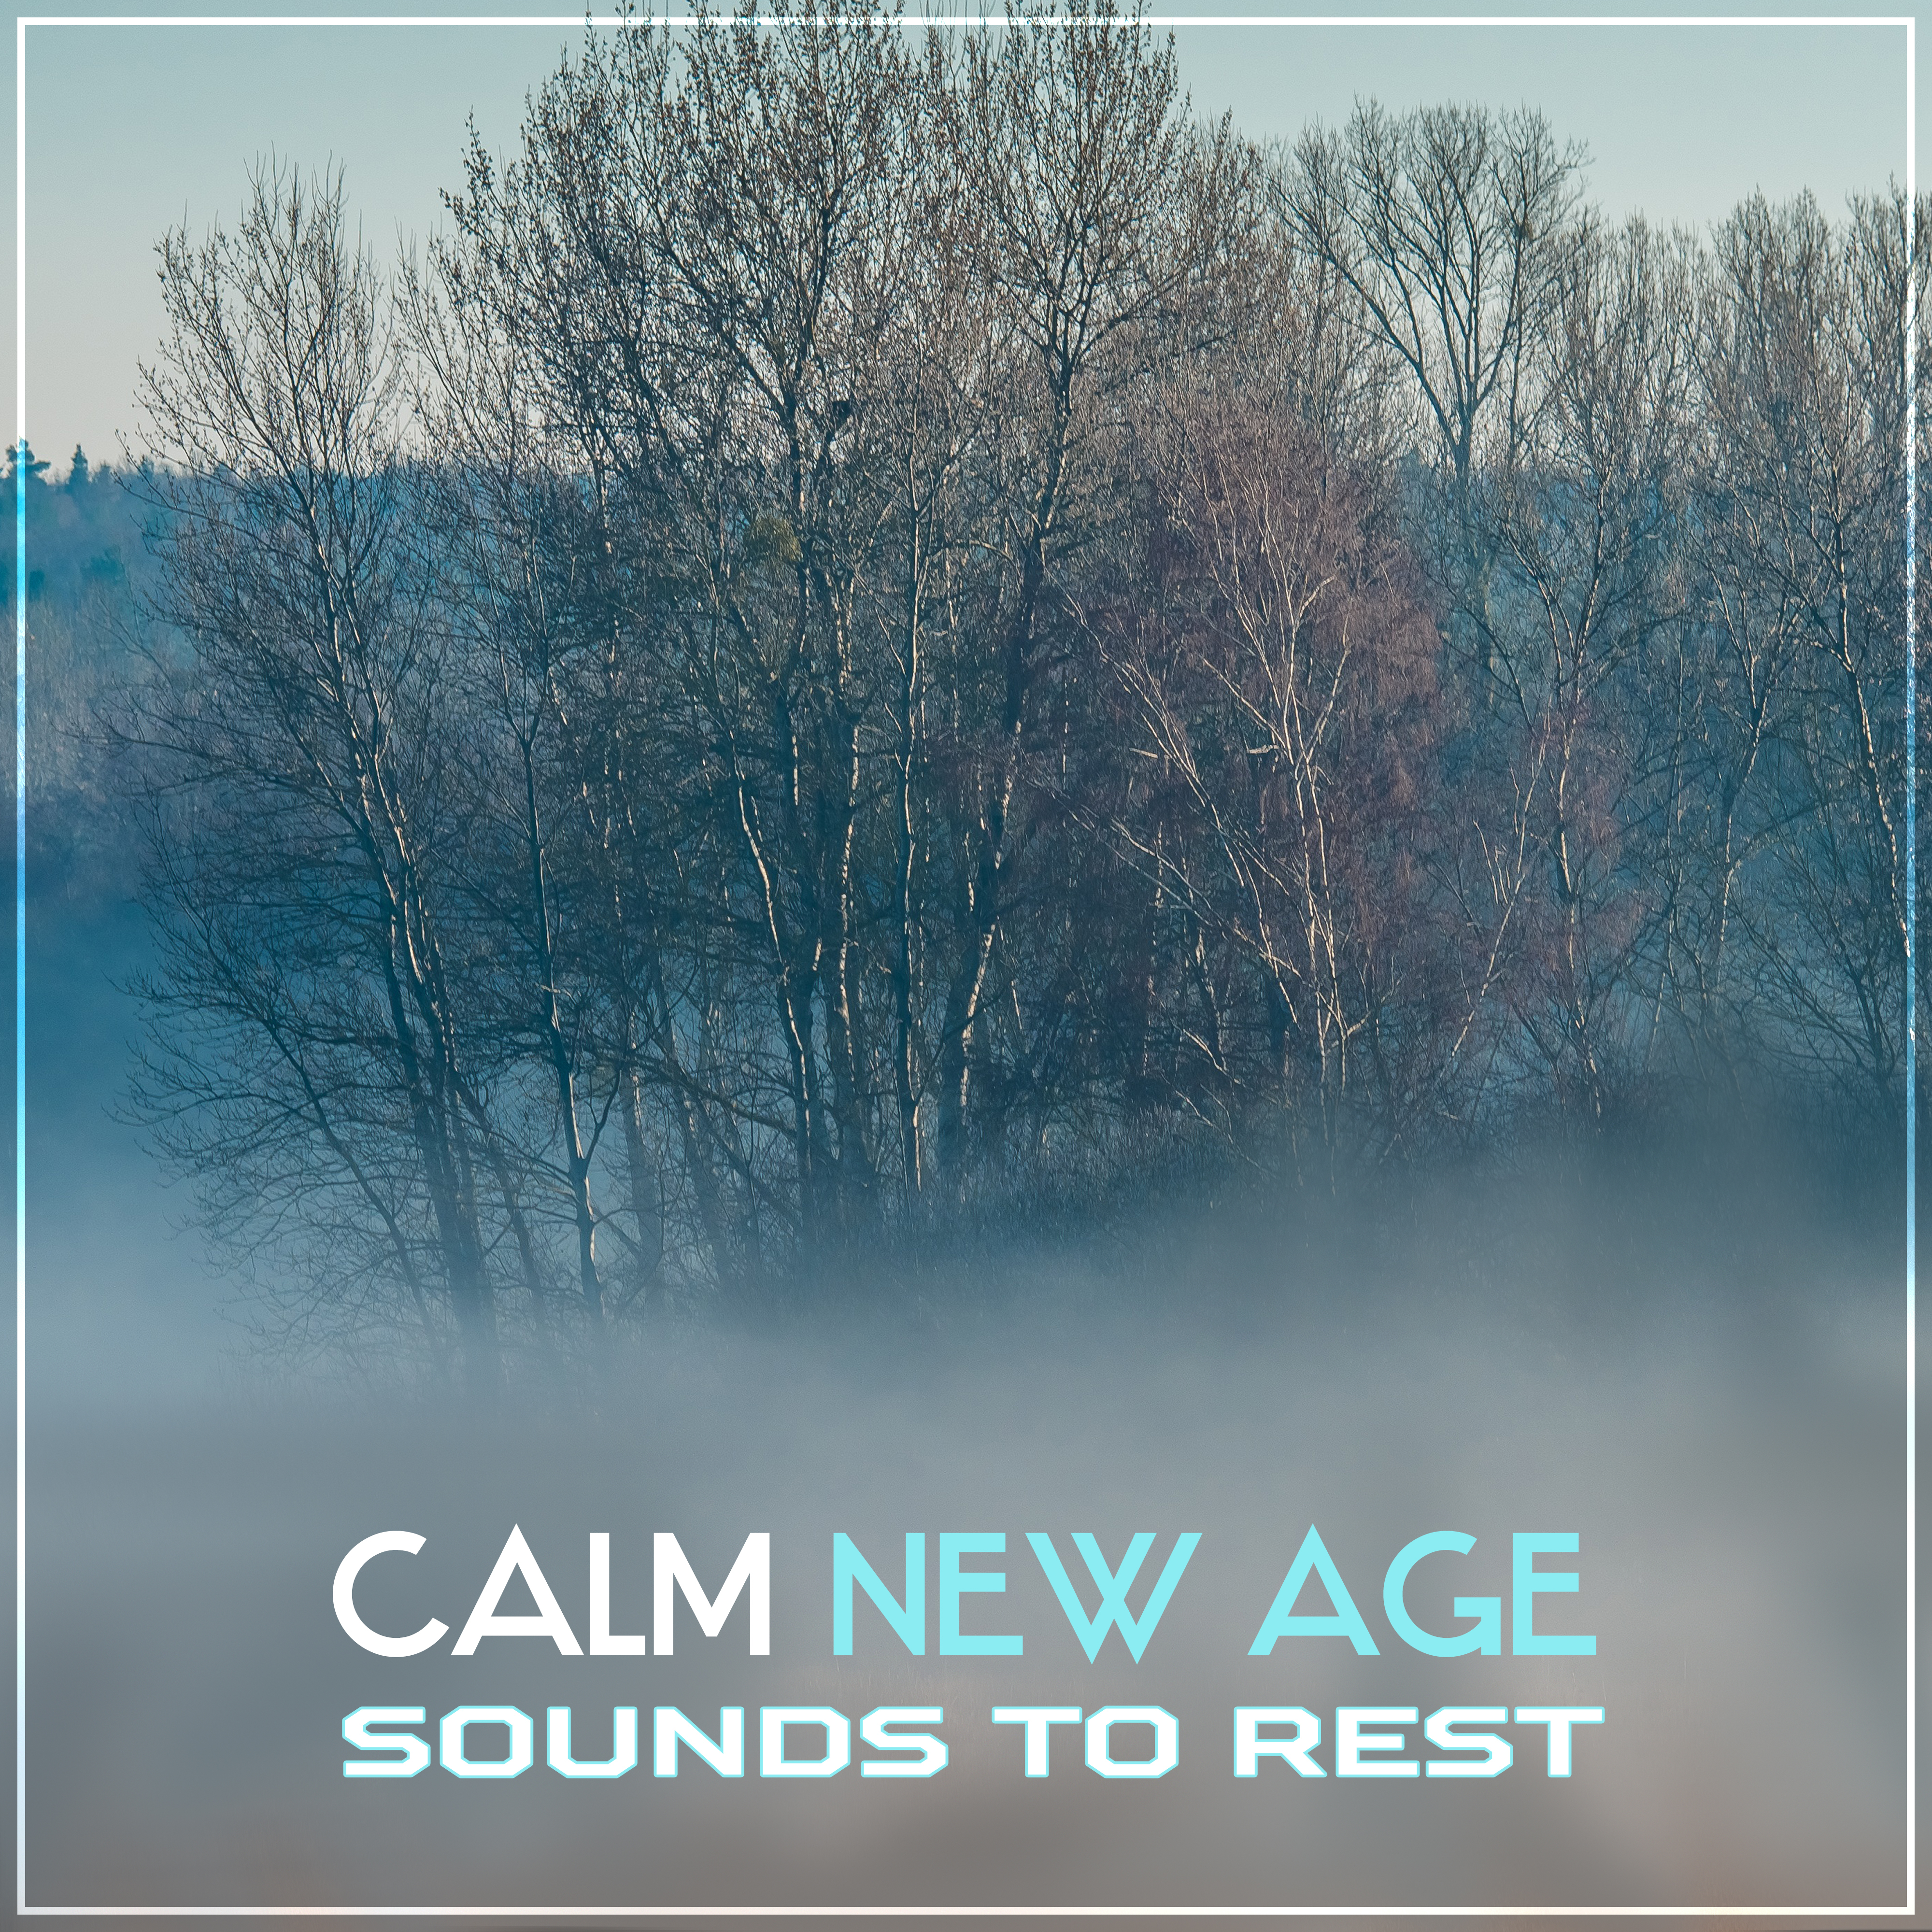 Calm New Age Sounds to Rest – Relaxing Sounds, Peaceful Waves, Inner Rest, Spirit Journey, New Age Piano